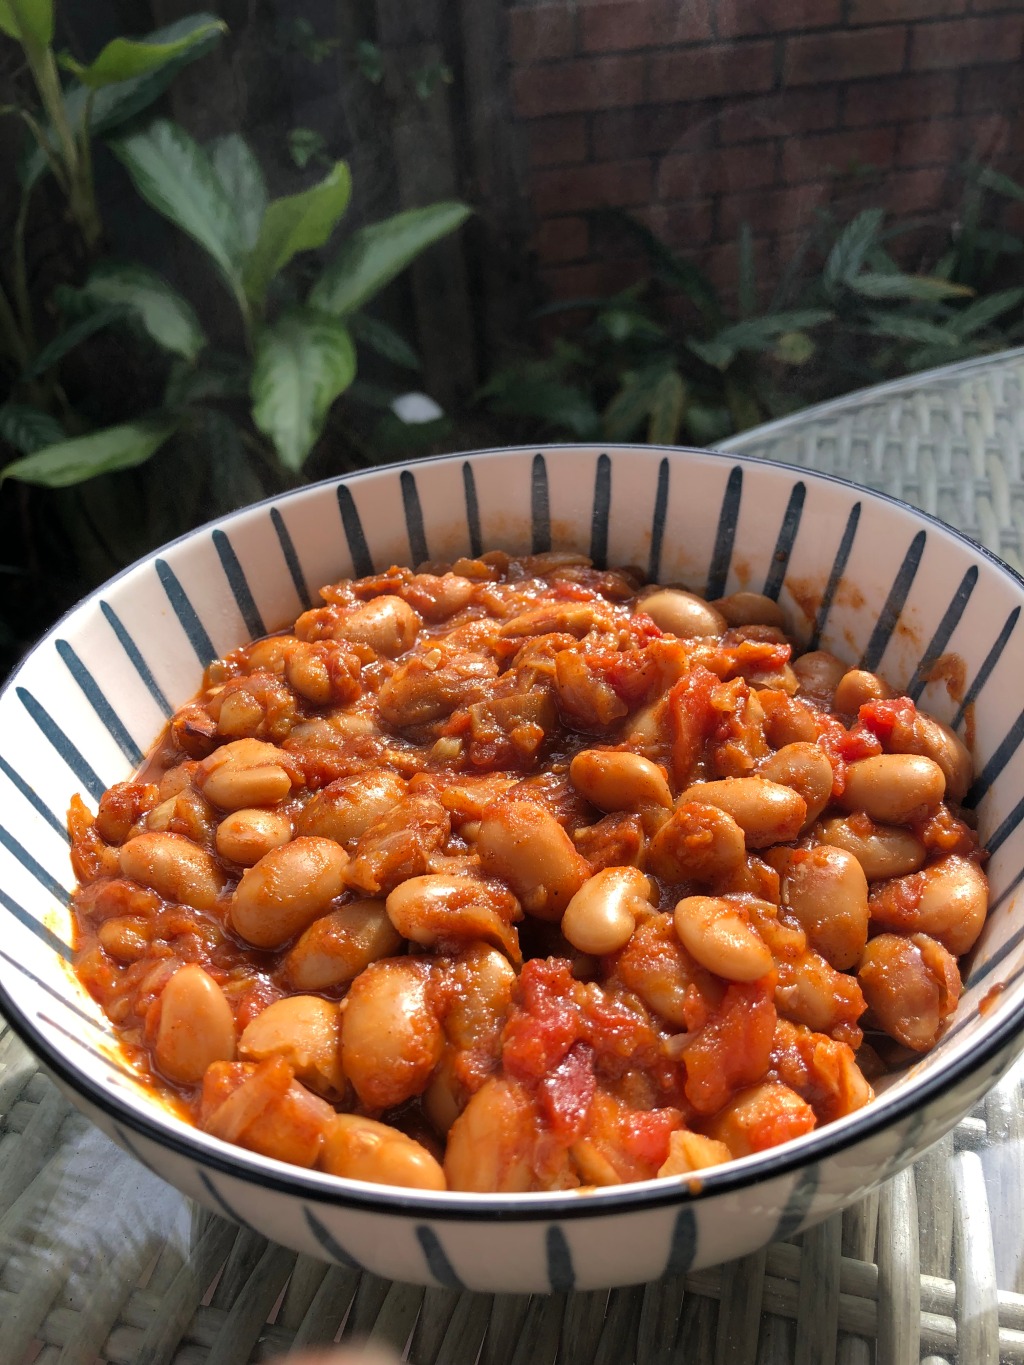 Butter bean and tomato bake